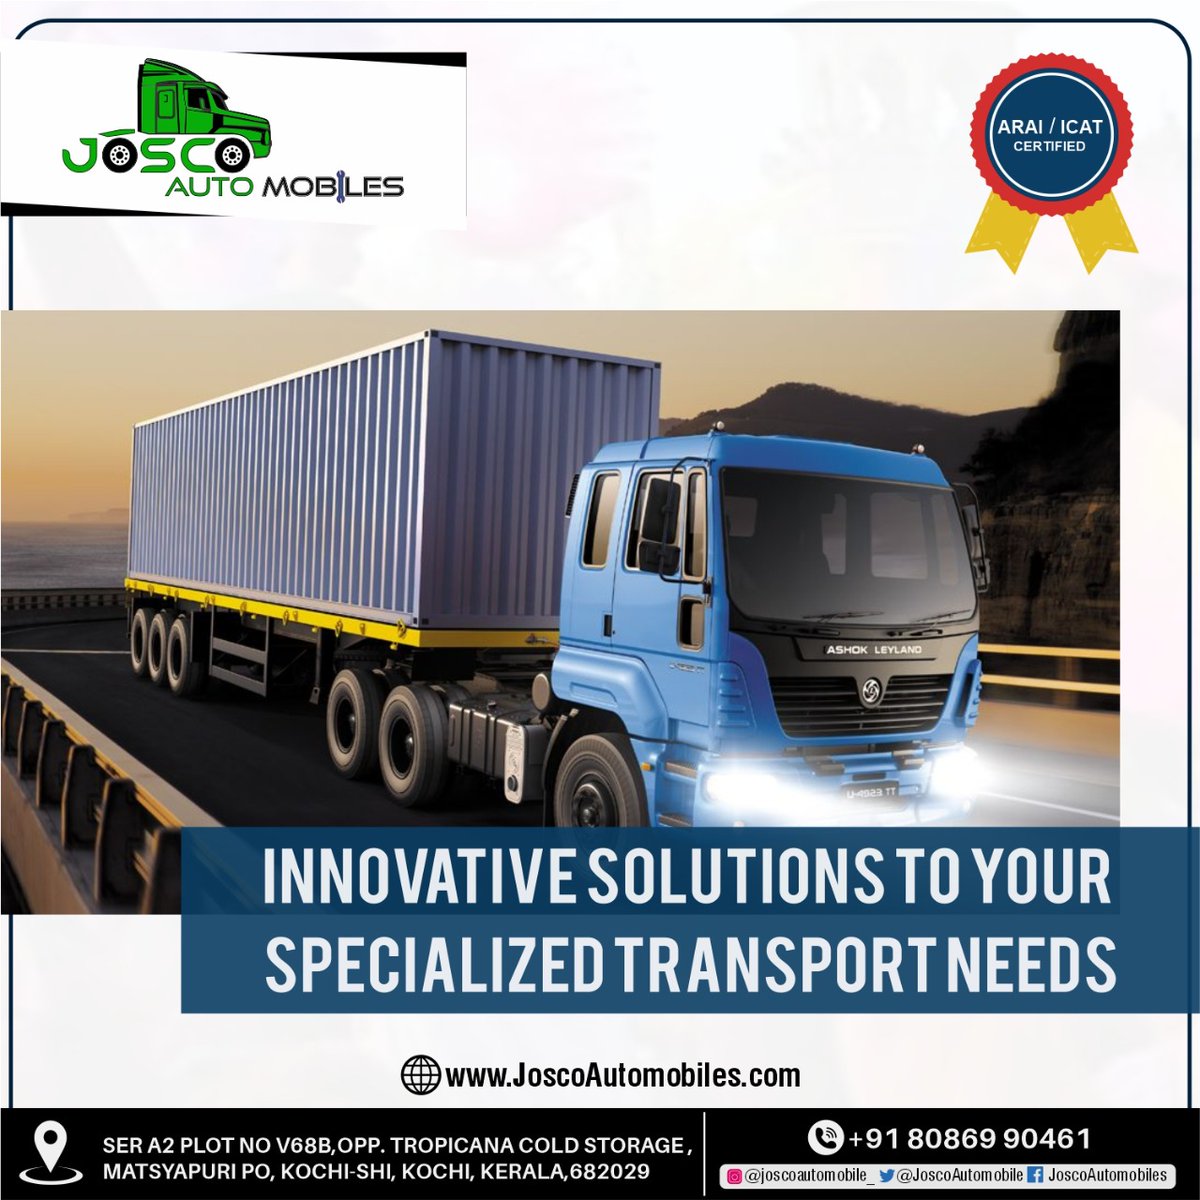 We manufacture Customized and Innovative #Truck body solutions to fulfill your Specialized #Transportation and #Trucking needs.
►WhatsApp/Call: 8086990461
#joscoautomobiles #travels #kerala #freight #trucker #truckdrivers #trucklife #trailerparts #truckdesigns #automobileservice